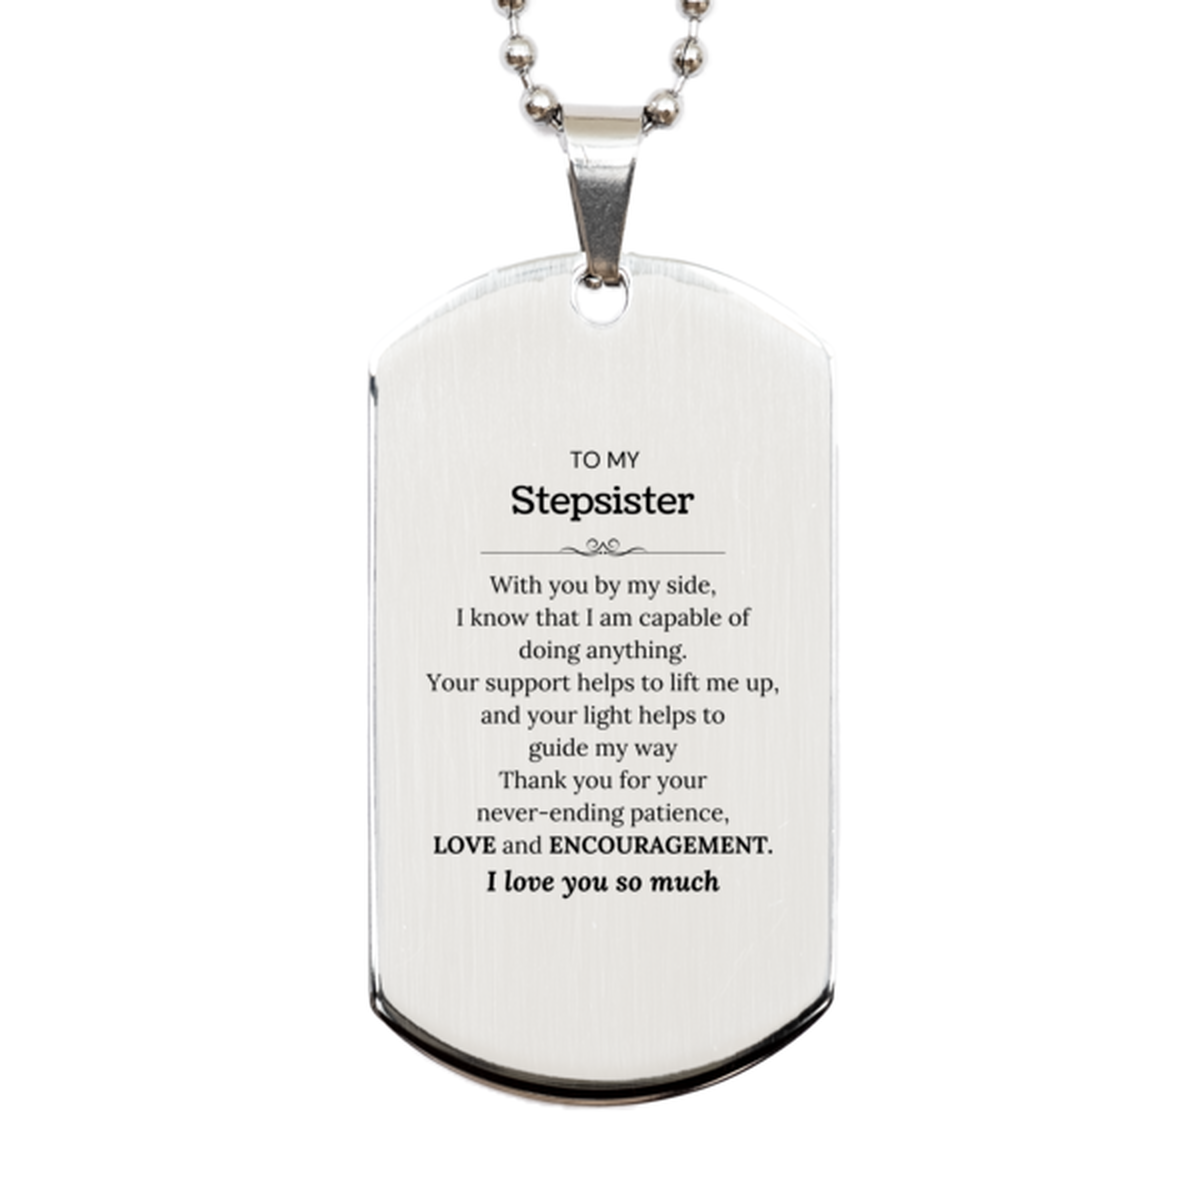 Appreciation Stepsister Silver Dog Tag Gifts, To My Stepsister Birthday Christmas Wedding Keepsake Gifts for Stepsister With you by my side, I know that I am capable of doing anything. I love you so much